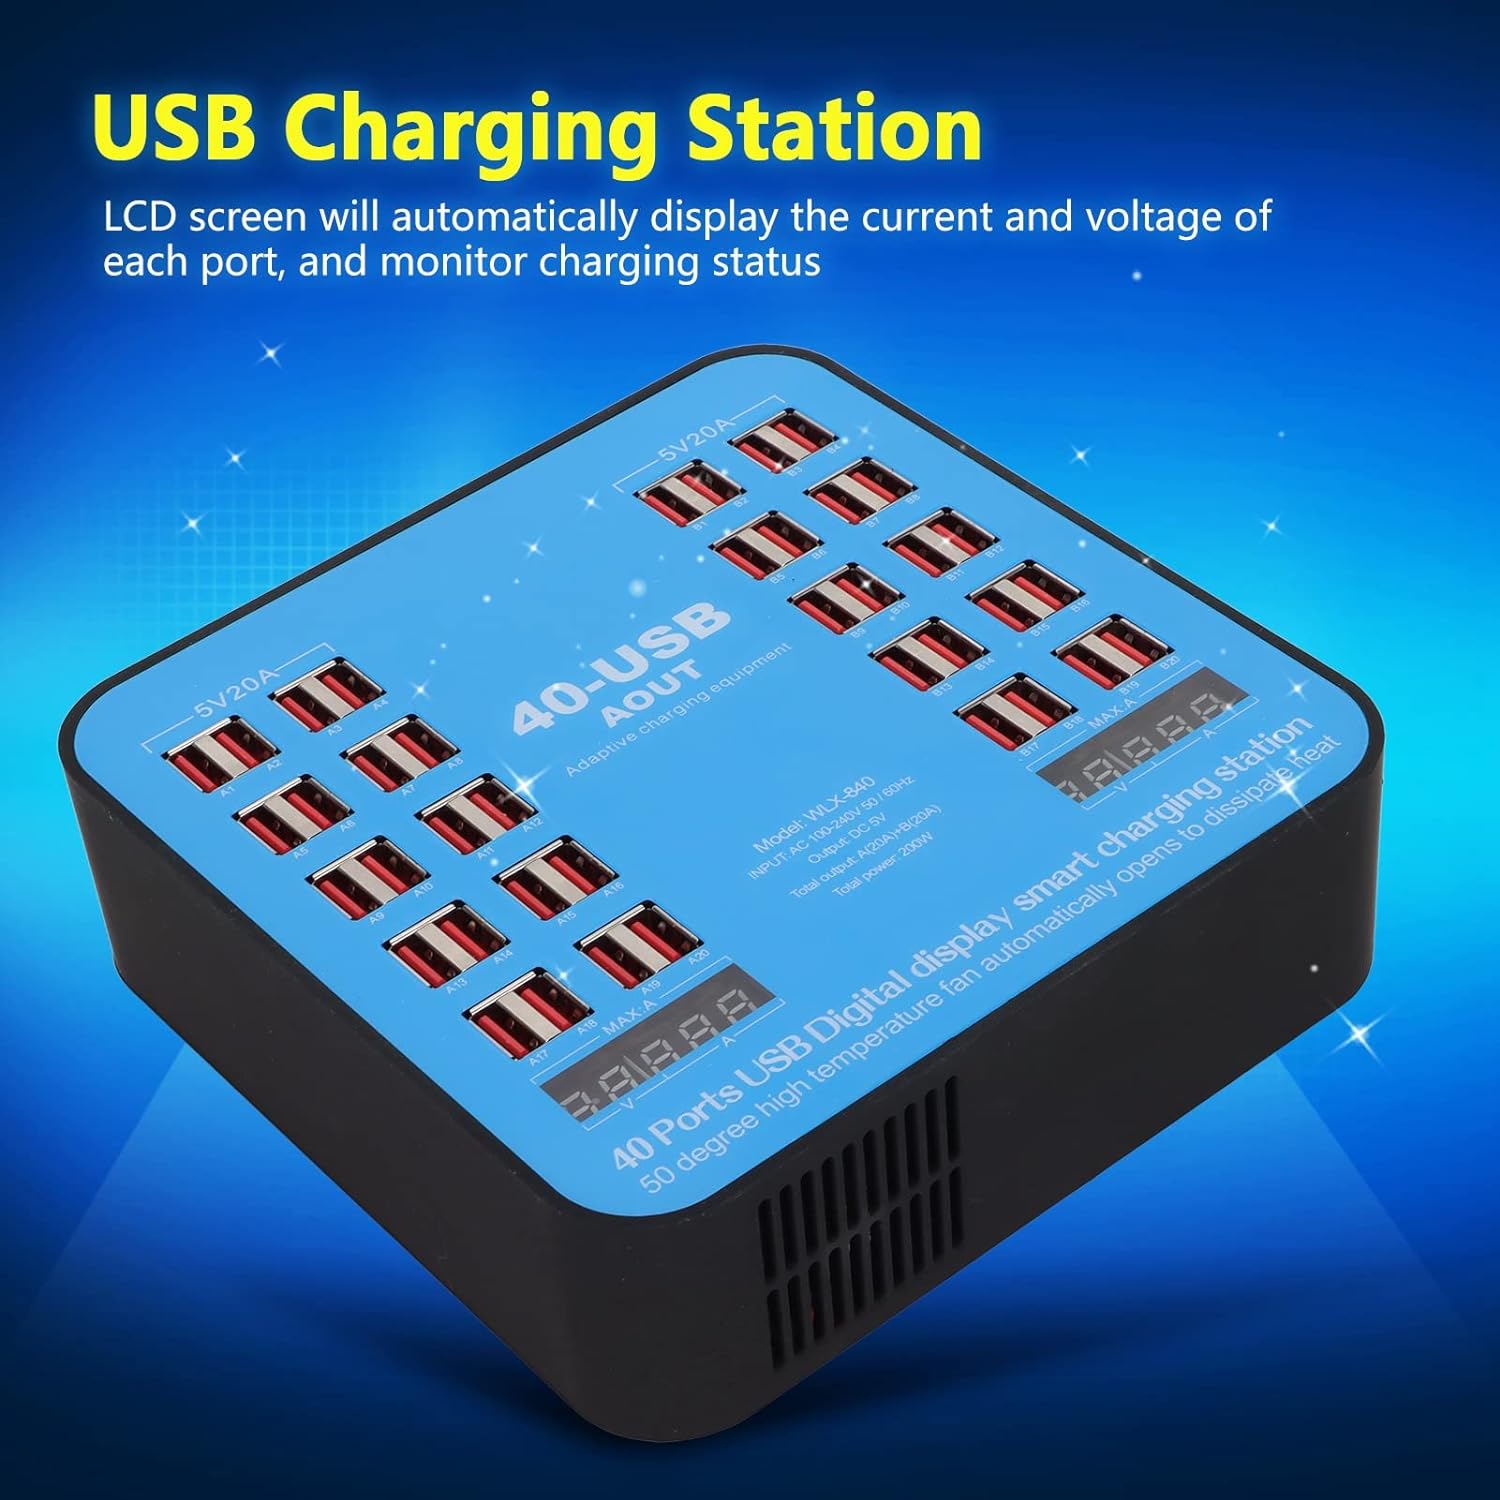 200W Universal Multiport Charging Station with 40 Ports, LCD Digital Display for Current and Voltage, Complete with Organizer Stand - Office Catch